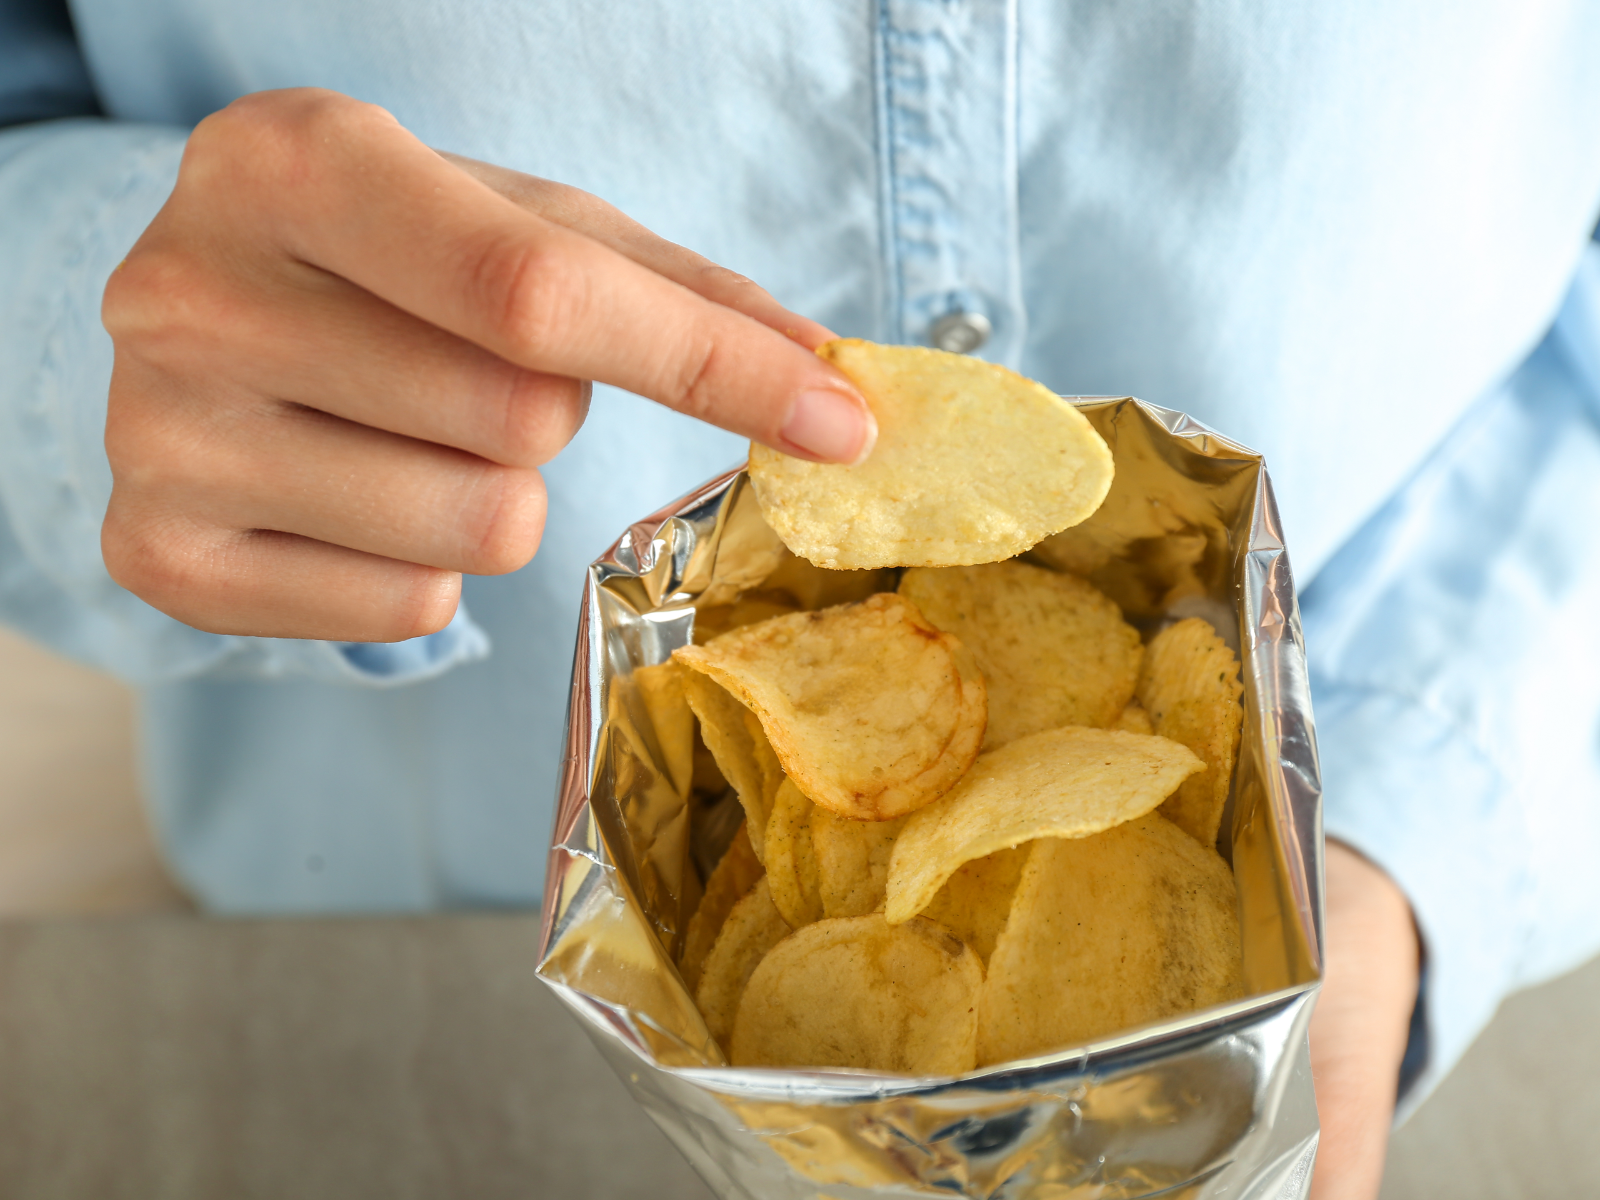 woman reaching into a bag of chips